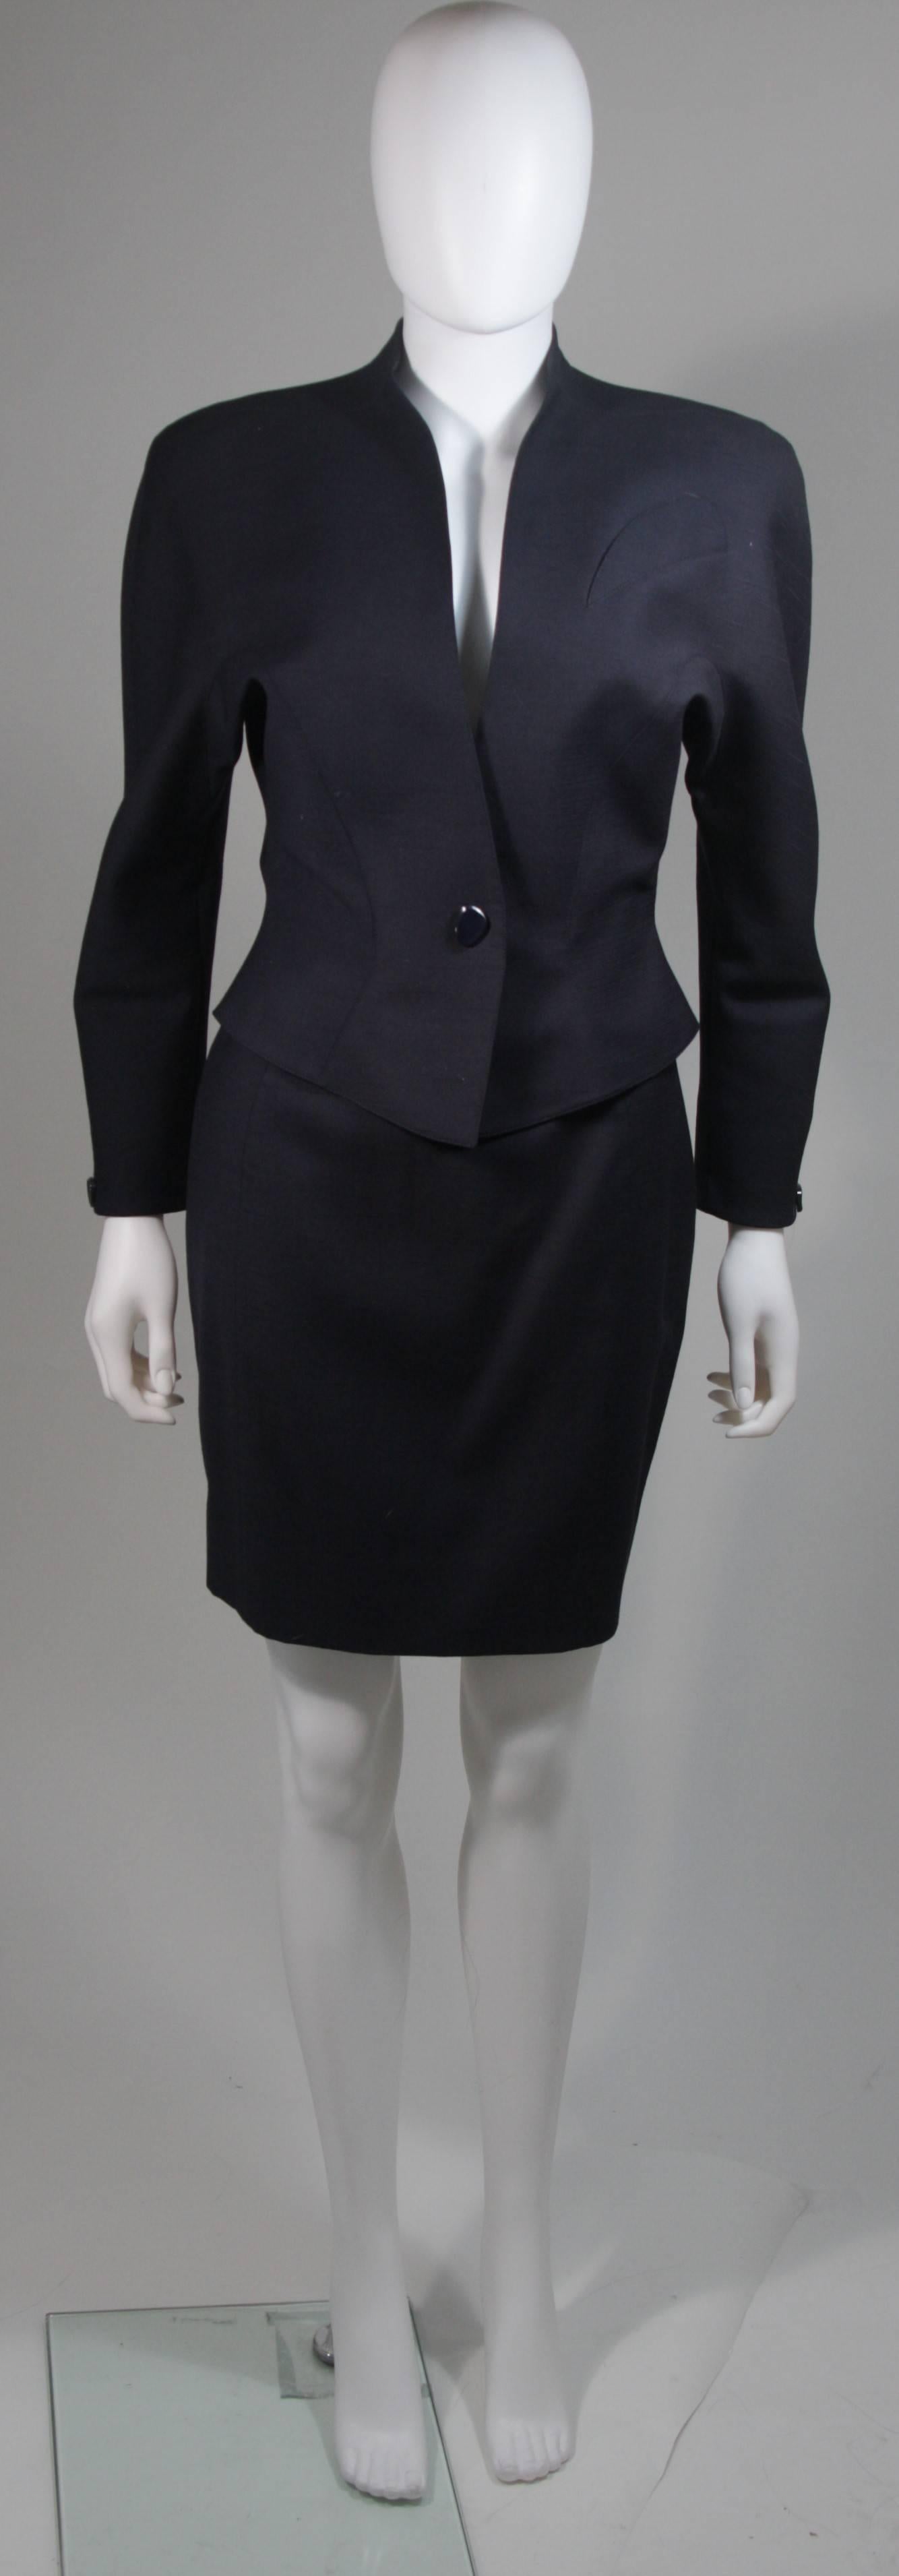  This skirt suit is composed of a  navy material. The jacket has a center front snap closure with button detail. The skirt has a classic pencil silhouette with zipper closure. In excellent vintage condition. Made in France. 

  **Please